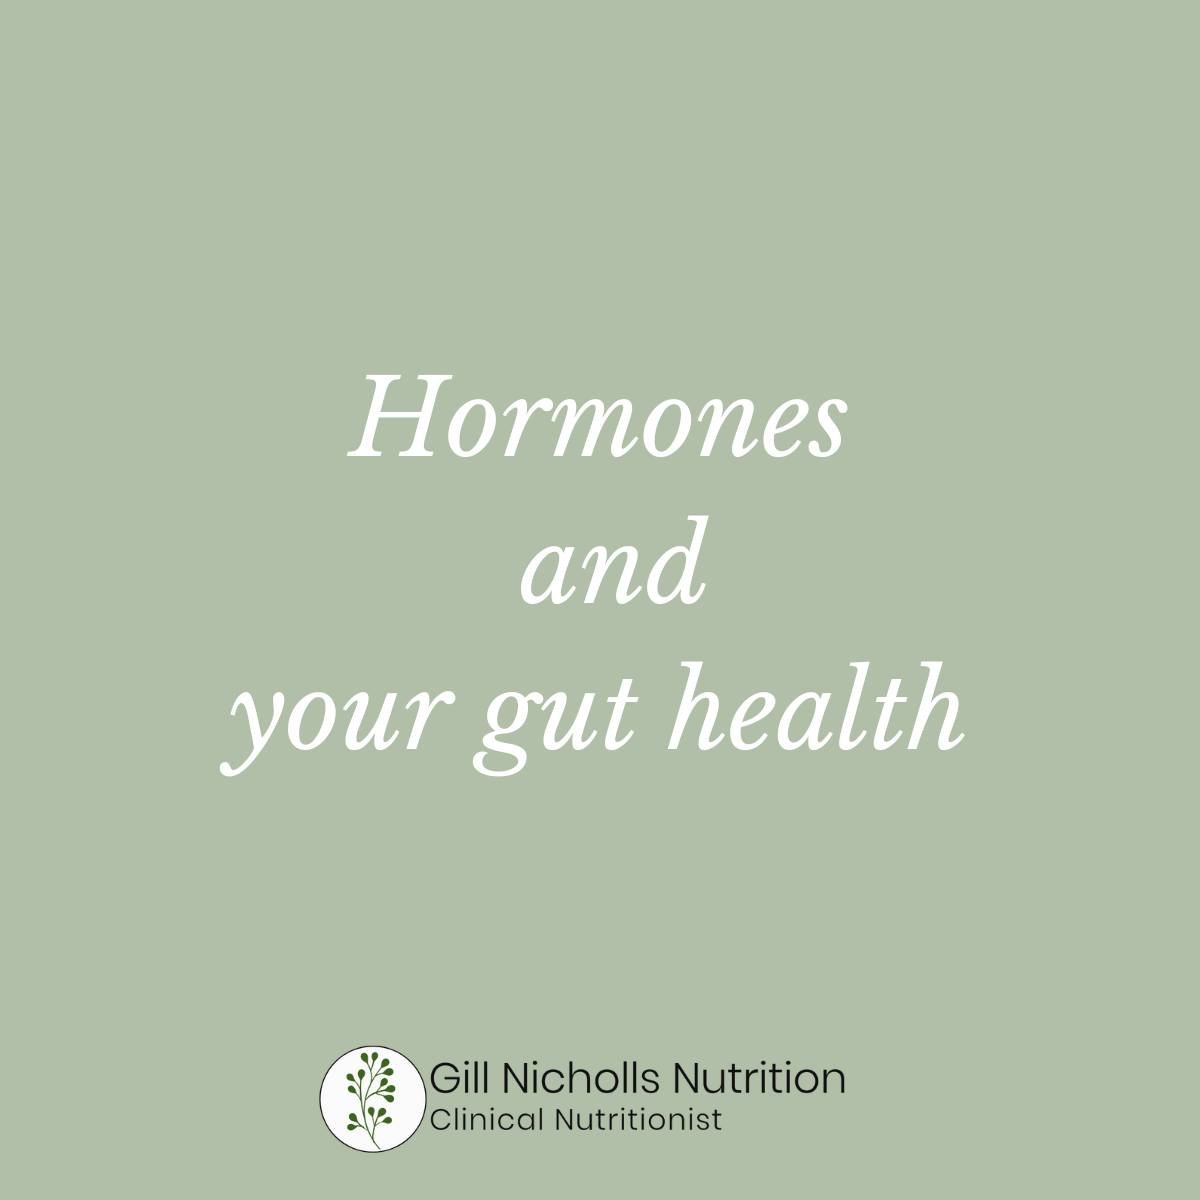 Hey everyone! Let's talk about a crucial connection that's often overlooked: the link between your gut health and hormone balance!

Did you know that your gut health can directly impact your hormone production, including thyroid hormones, estrogen, a